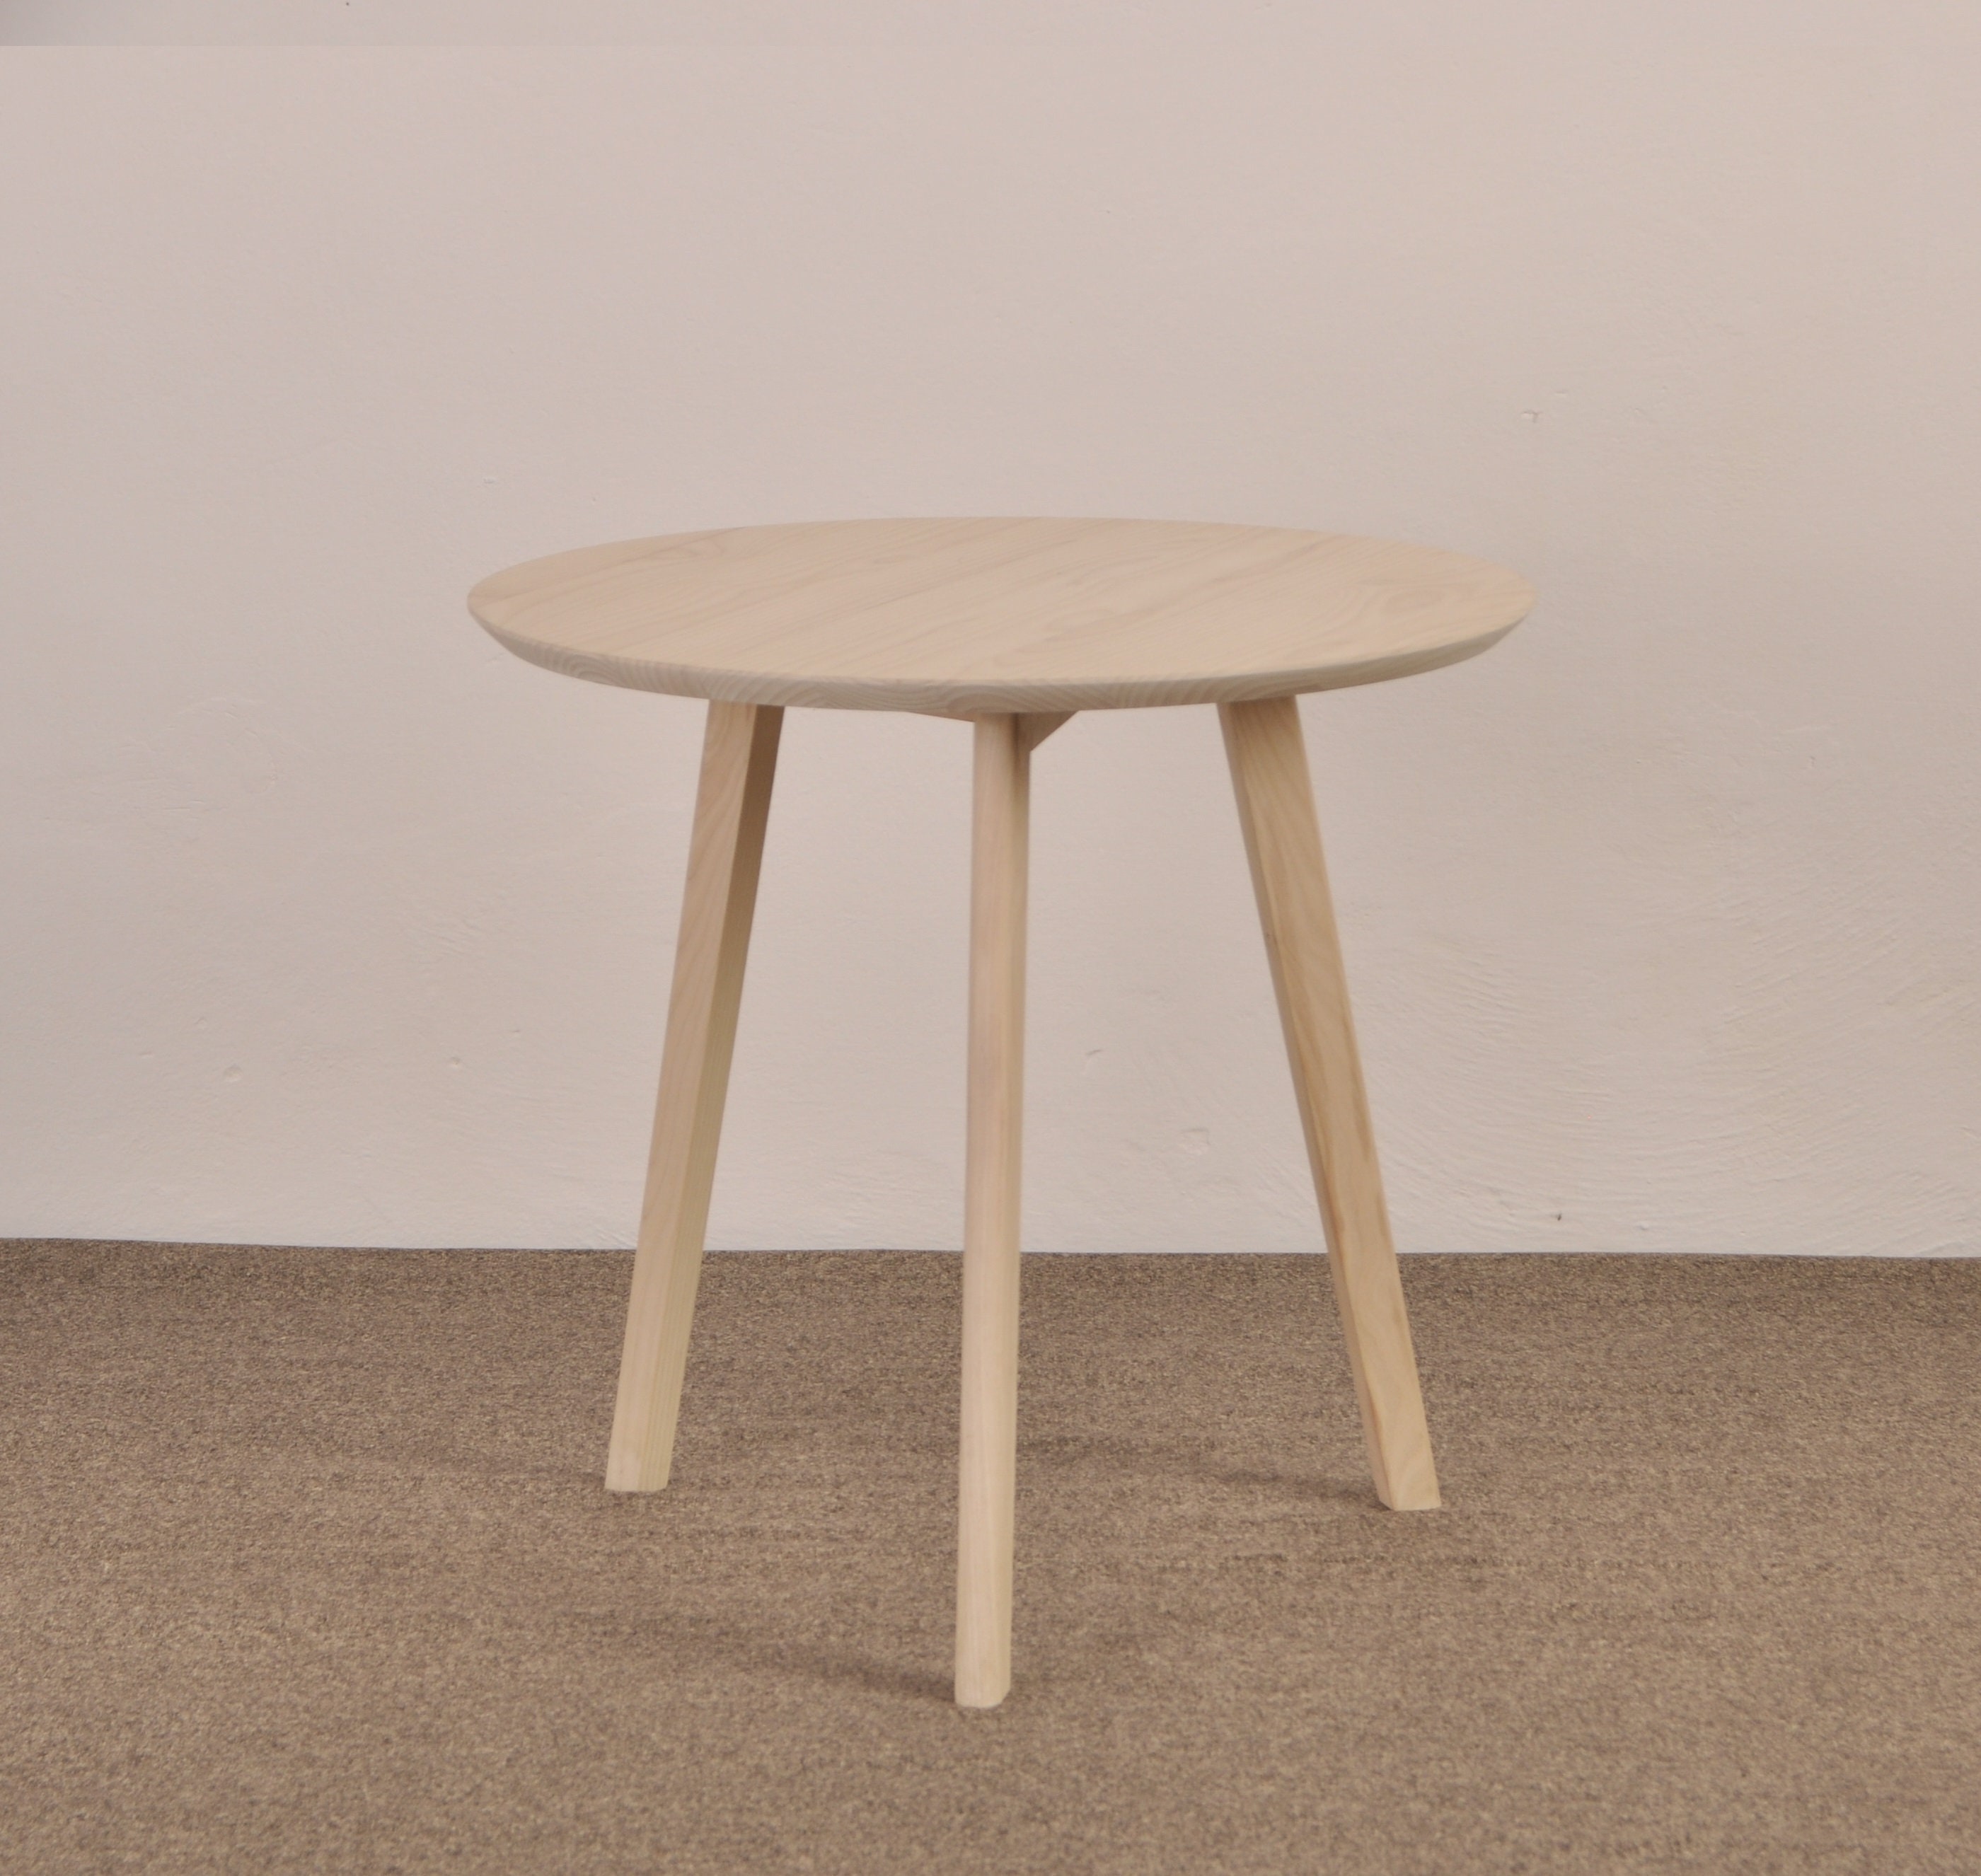 Round Coffee Table Three Legs, 3 Legs Round Coffee Table With Storage